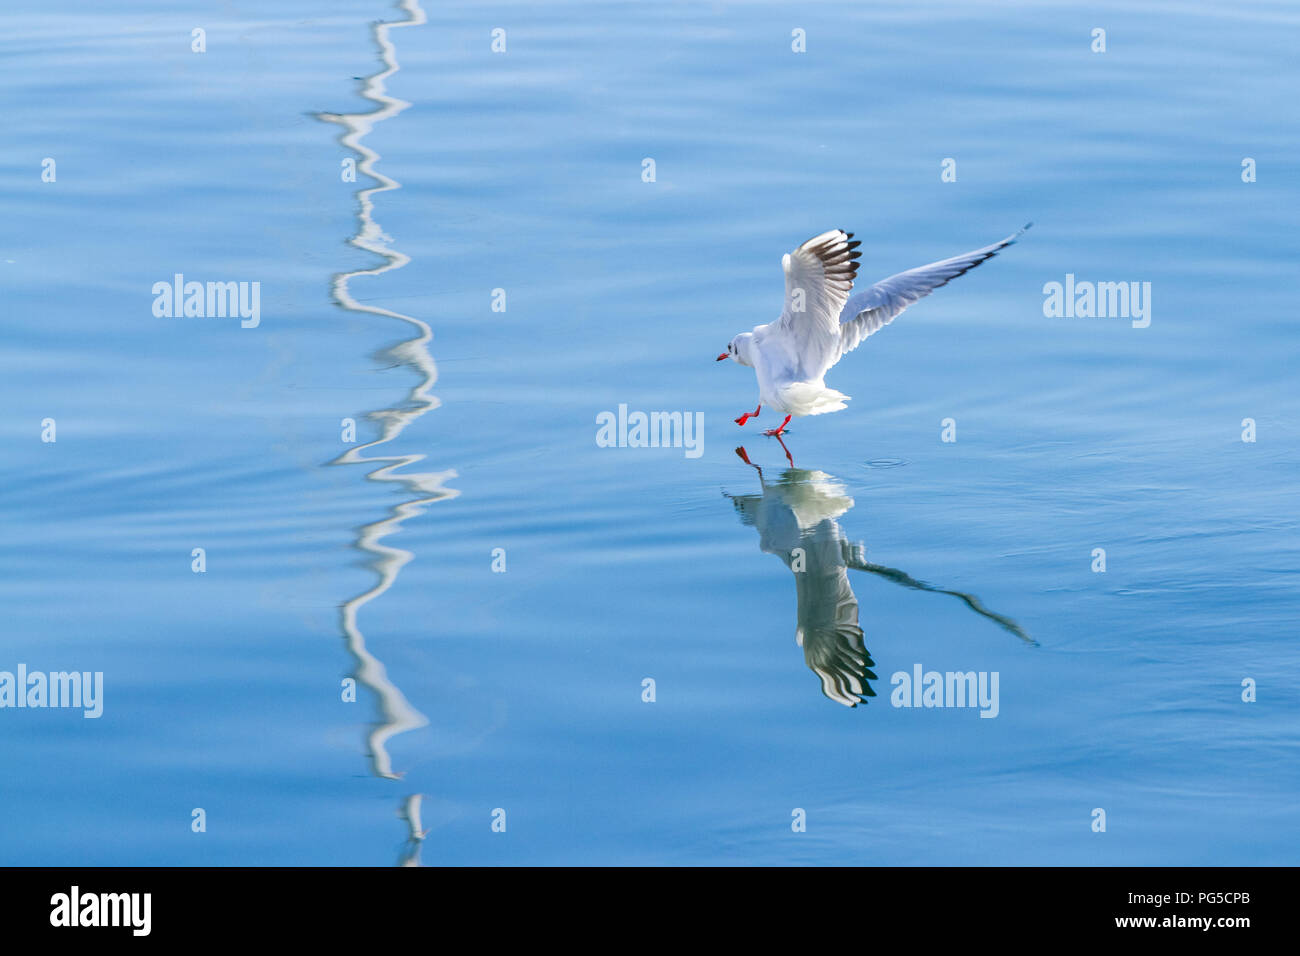 Photographs of seagulls in the port of Aguilas, Murcia Stock Photo